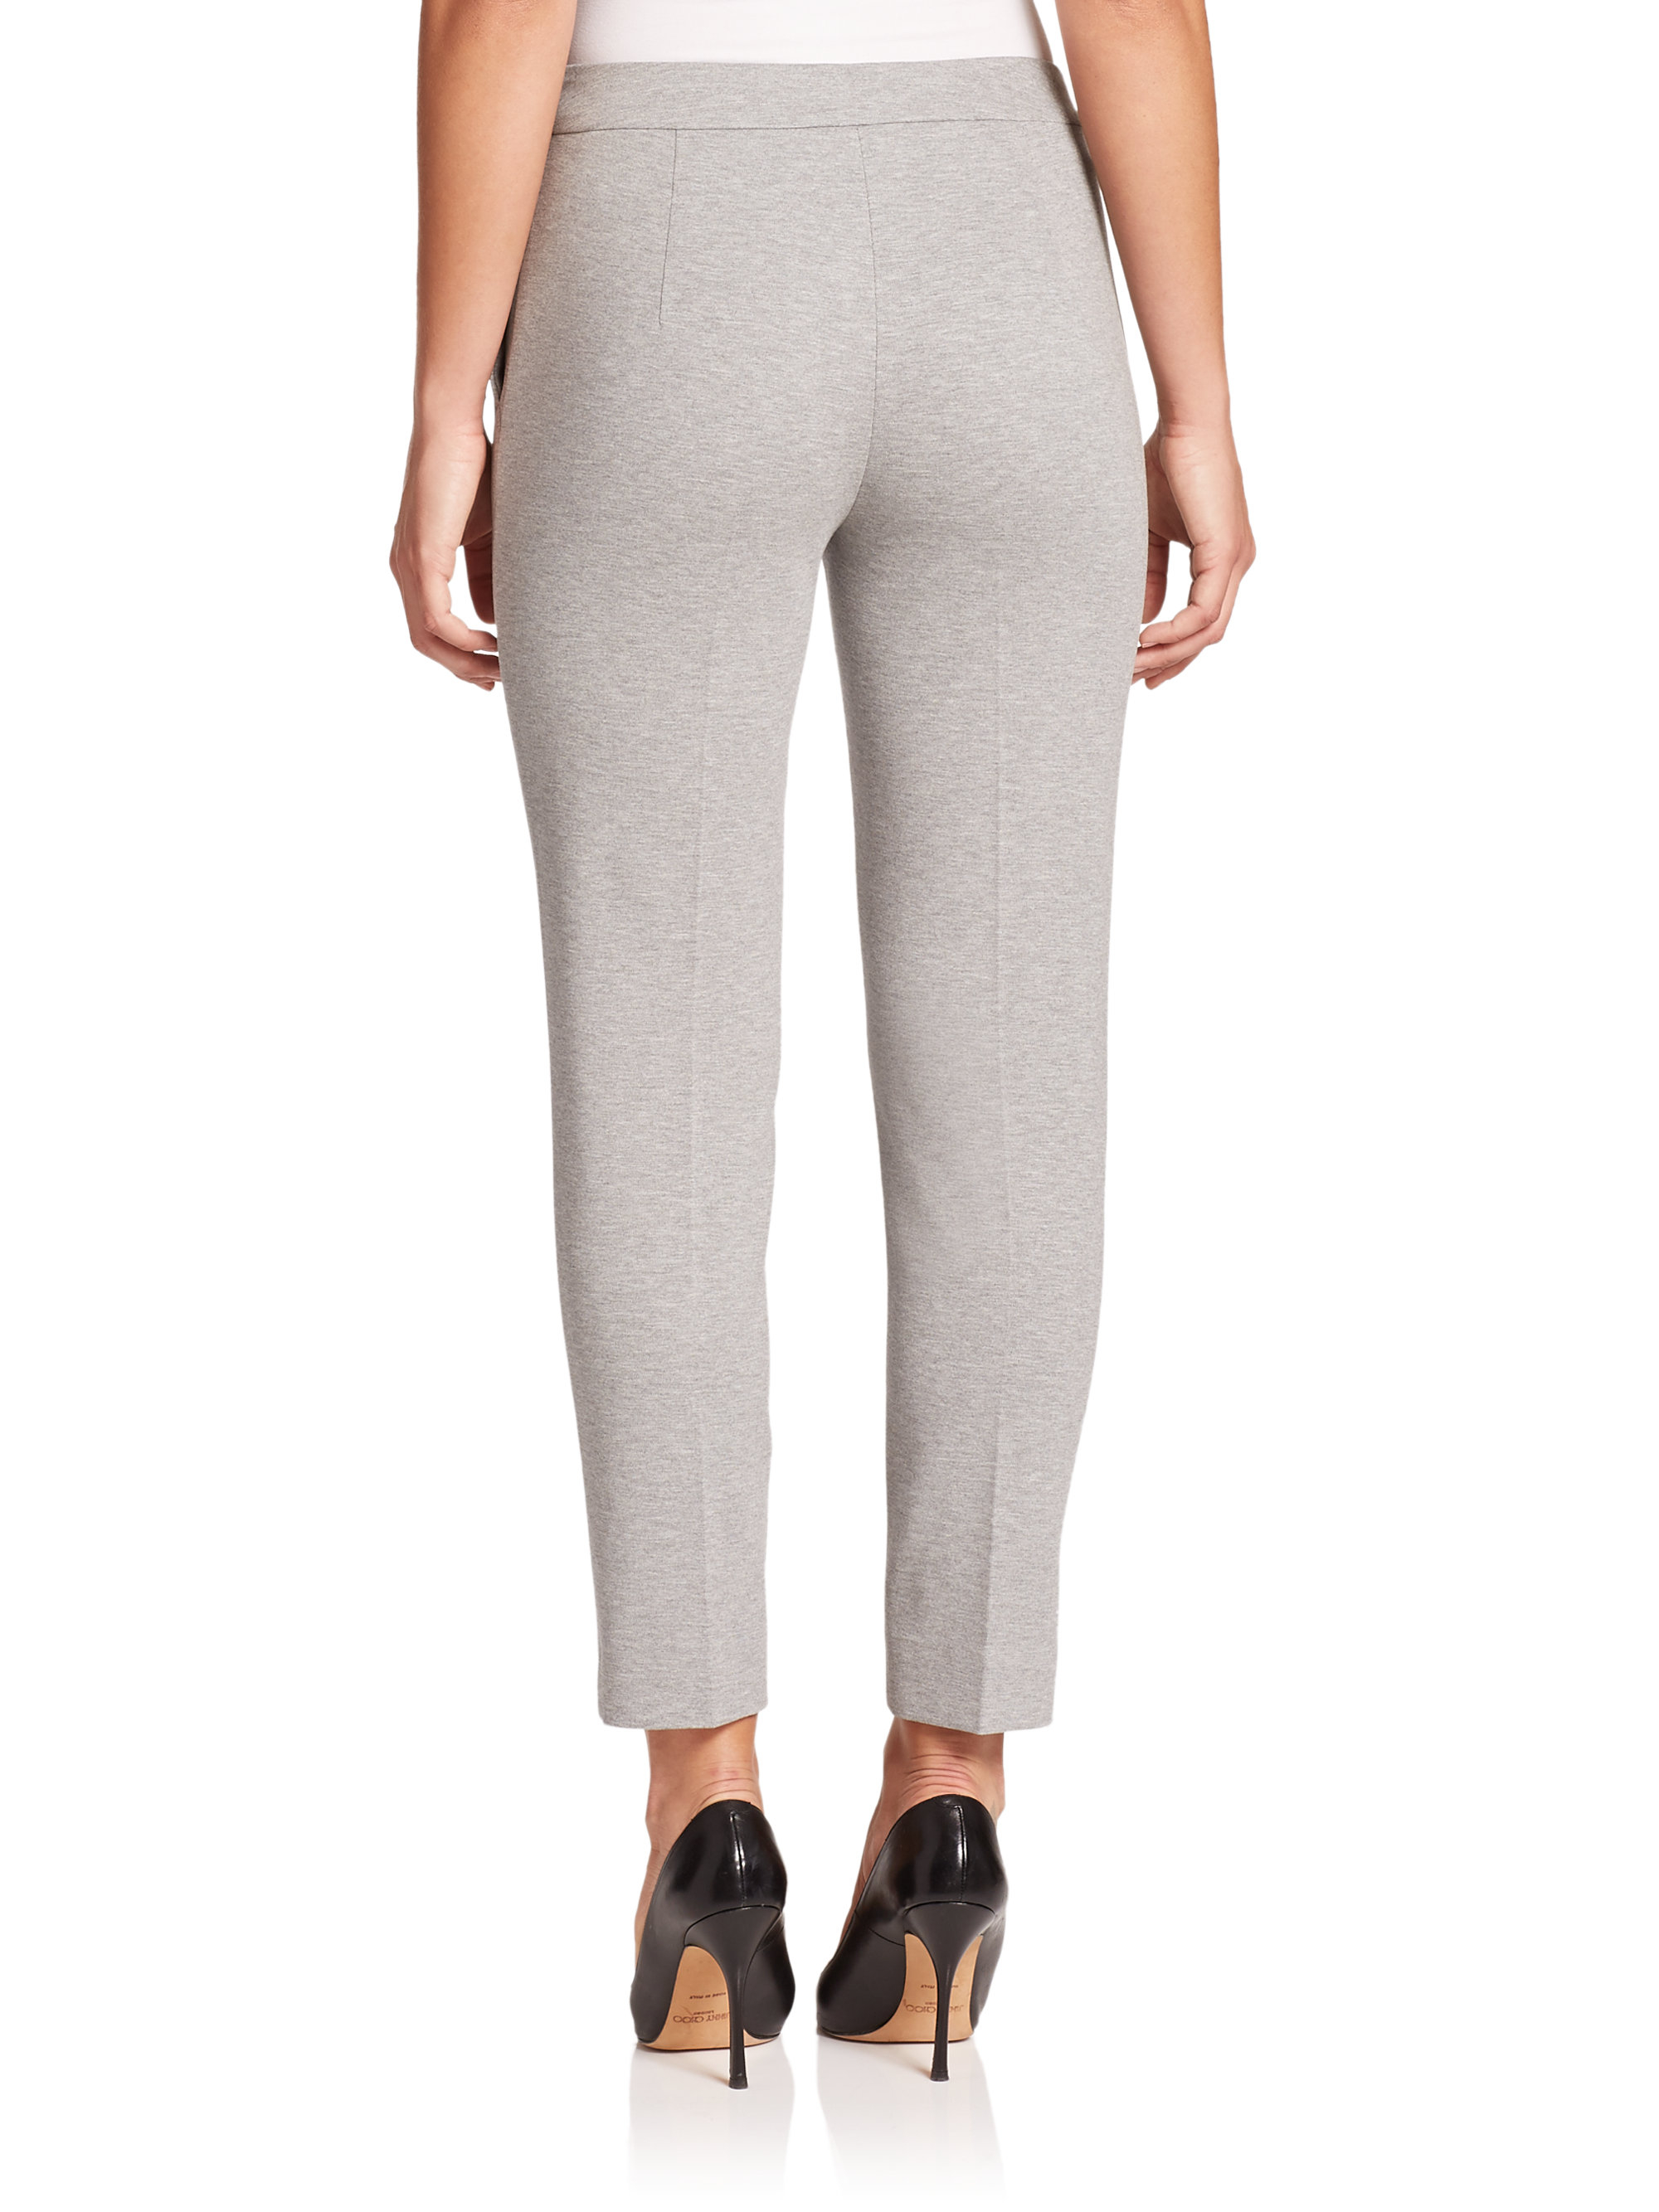 Lyst - Max Mara Pegno Jersey Trousers in Gray